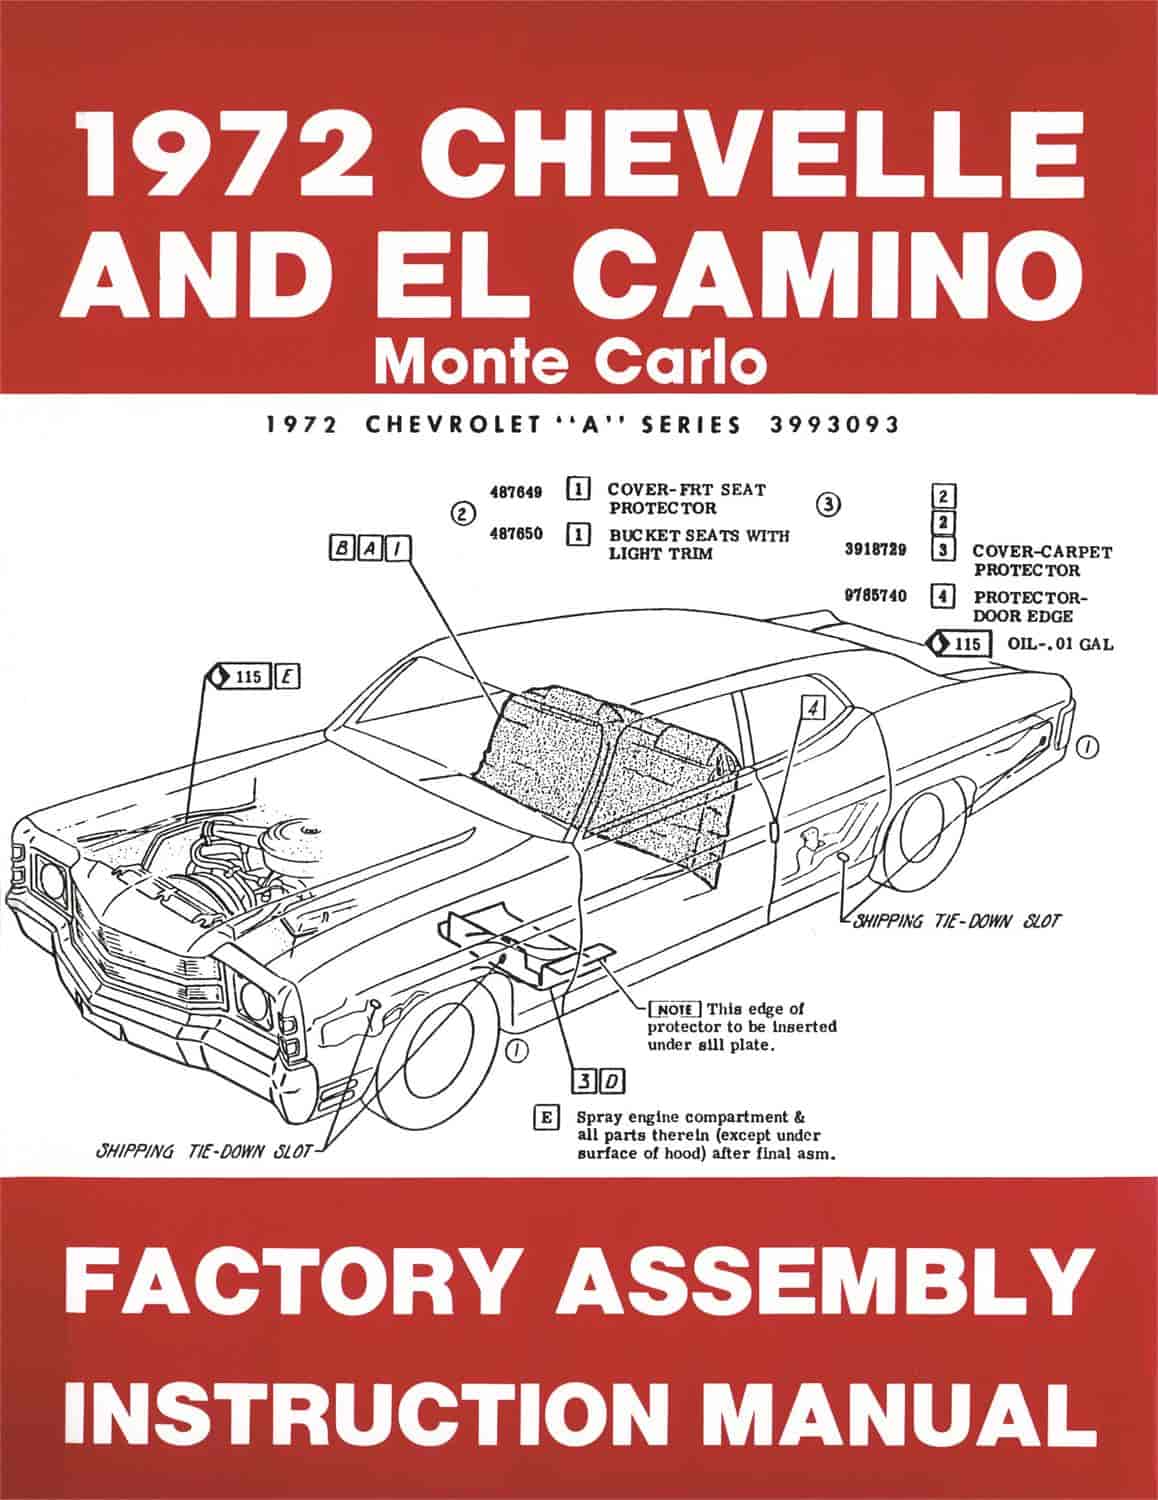 Factory Assembly Manual 1972 Chevy Chevelle, El Camino & Monte Carlo